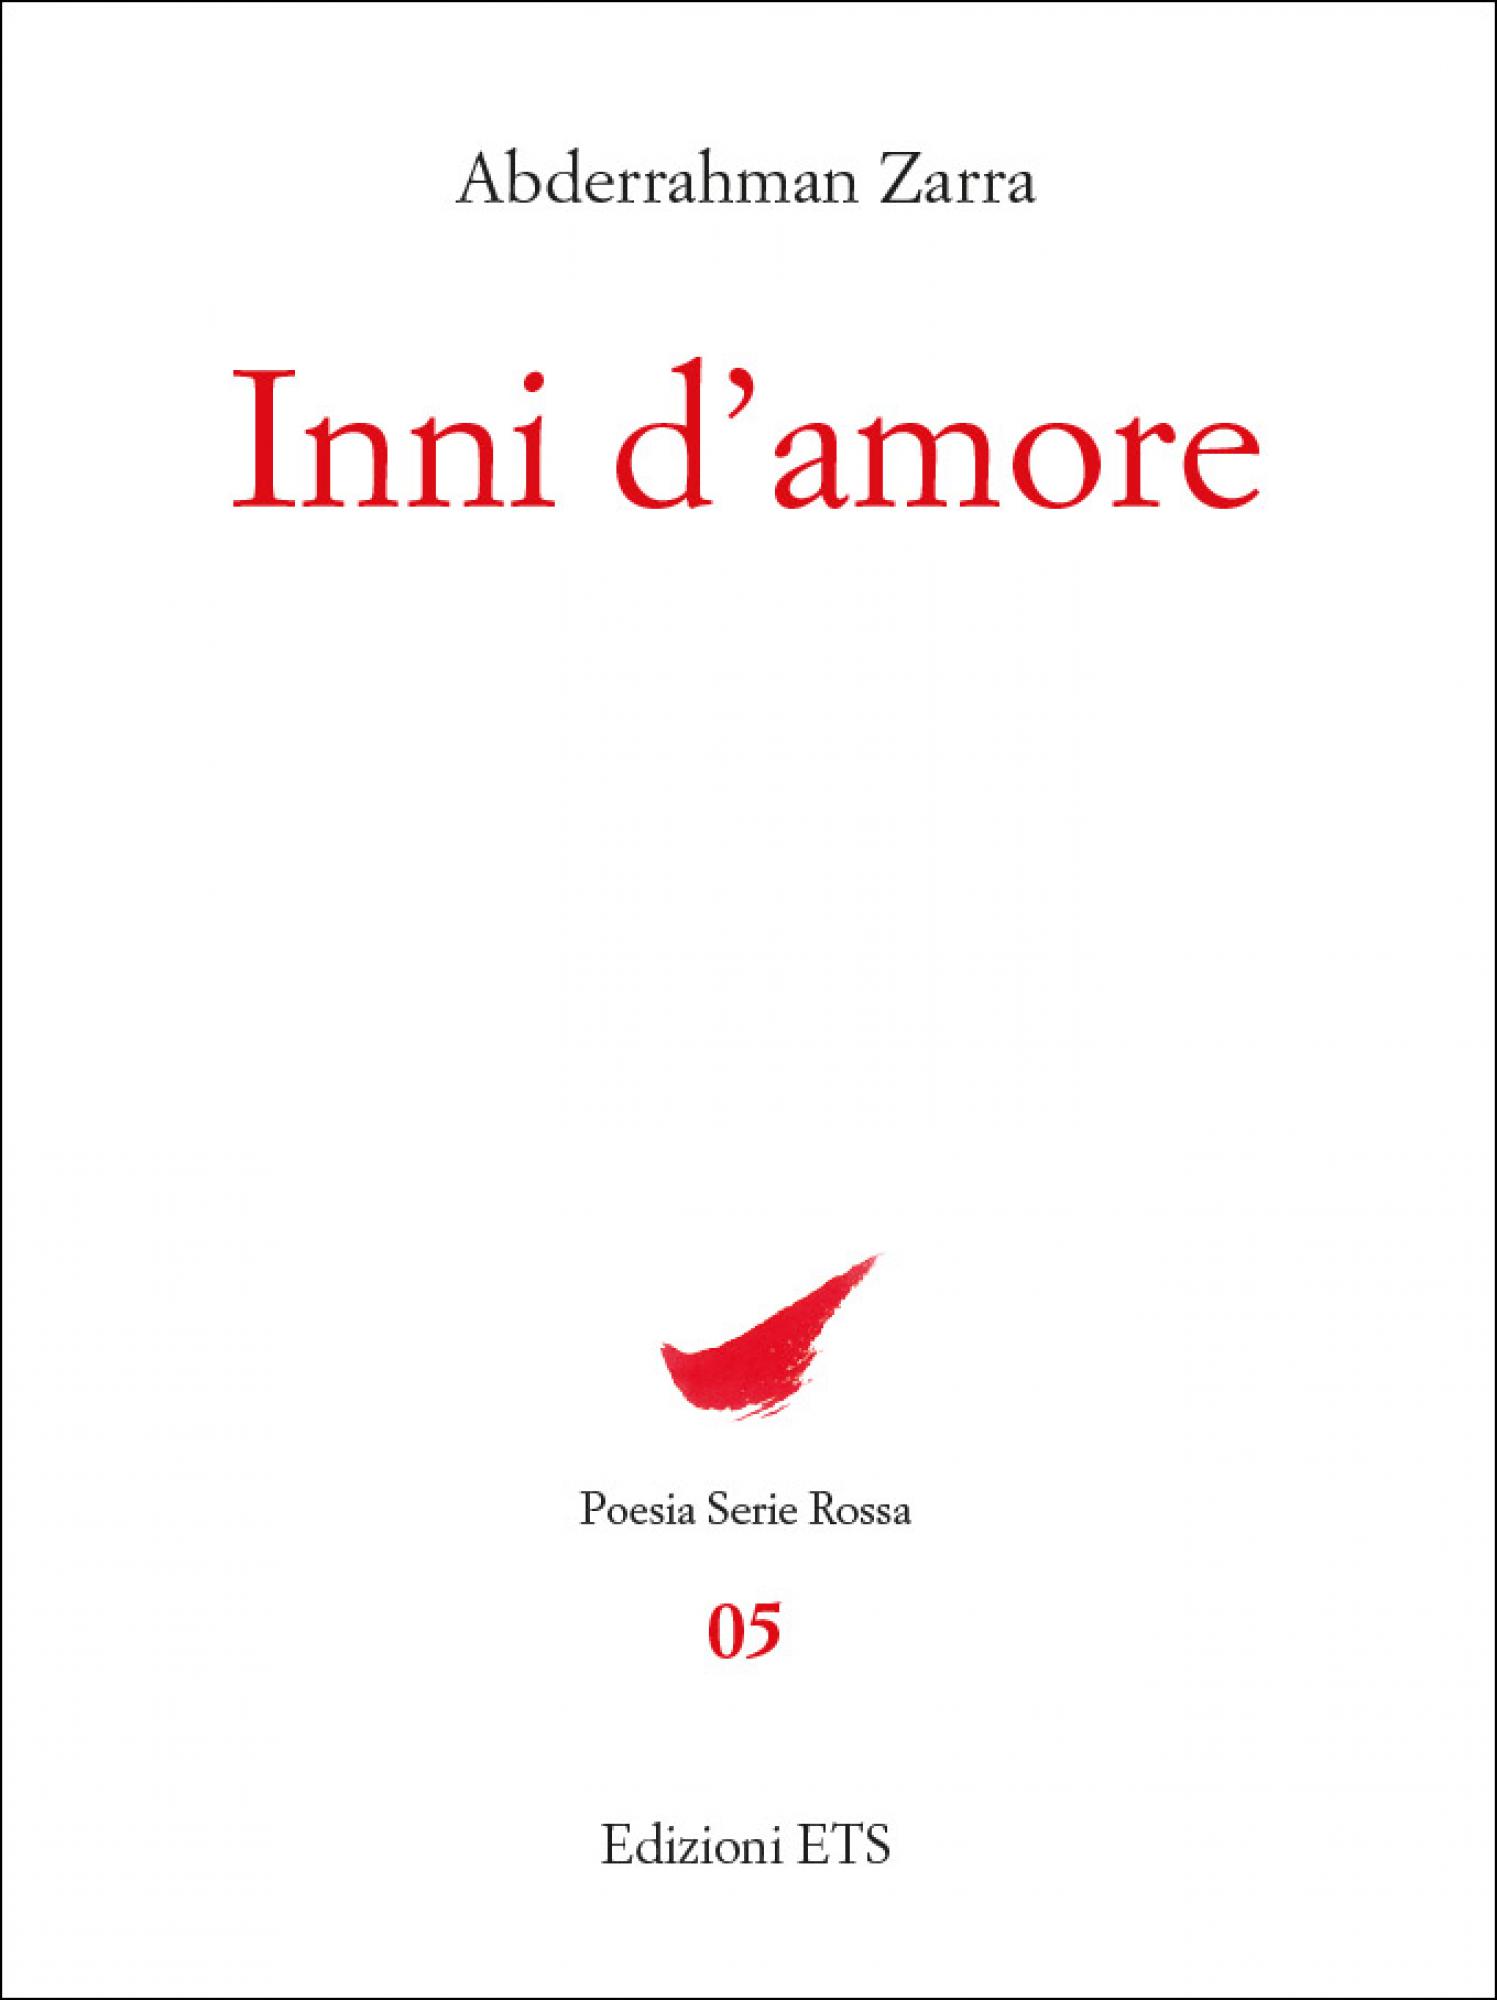 Inni d'amore